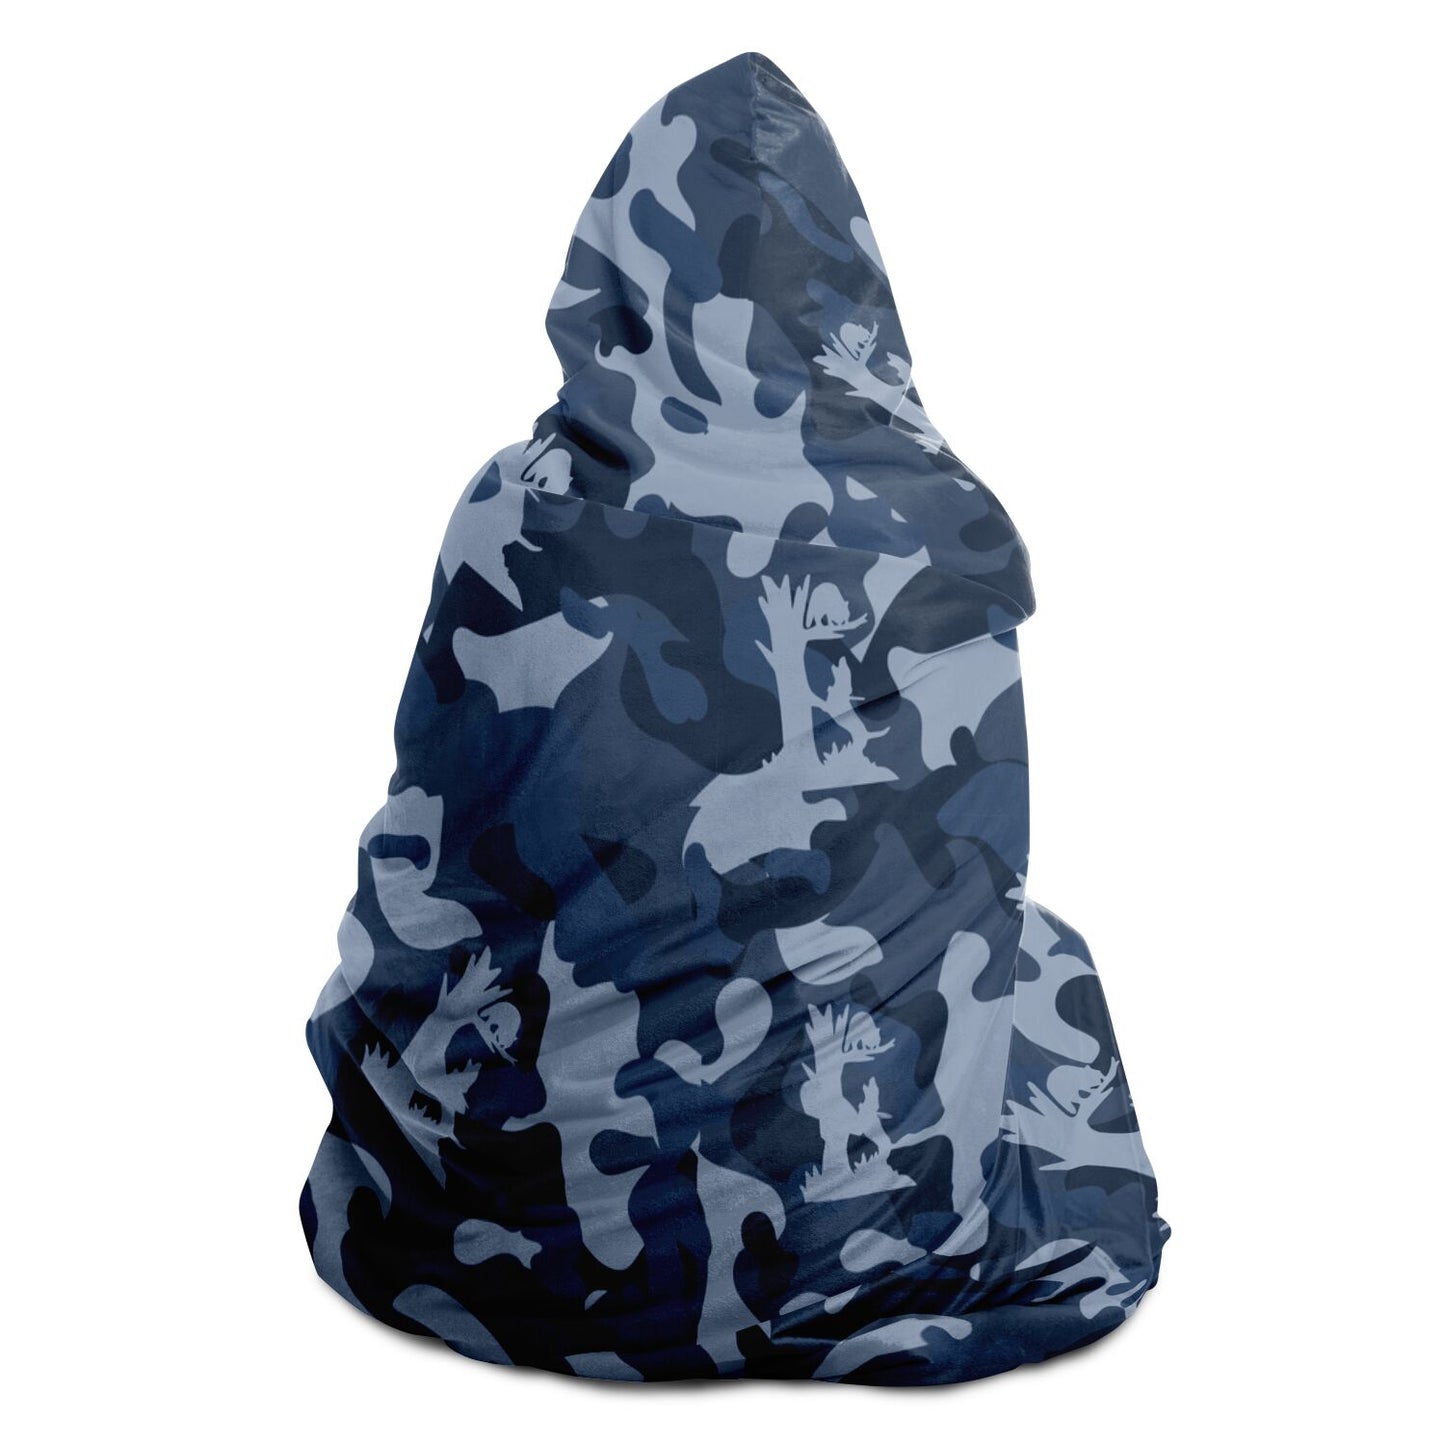 Blue Camo Coon Hunting Hooded Blanket in Adult or Youth